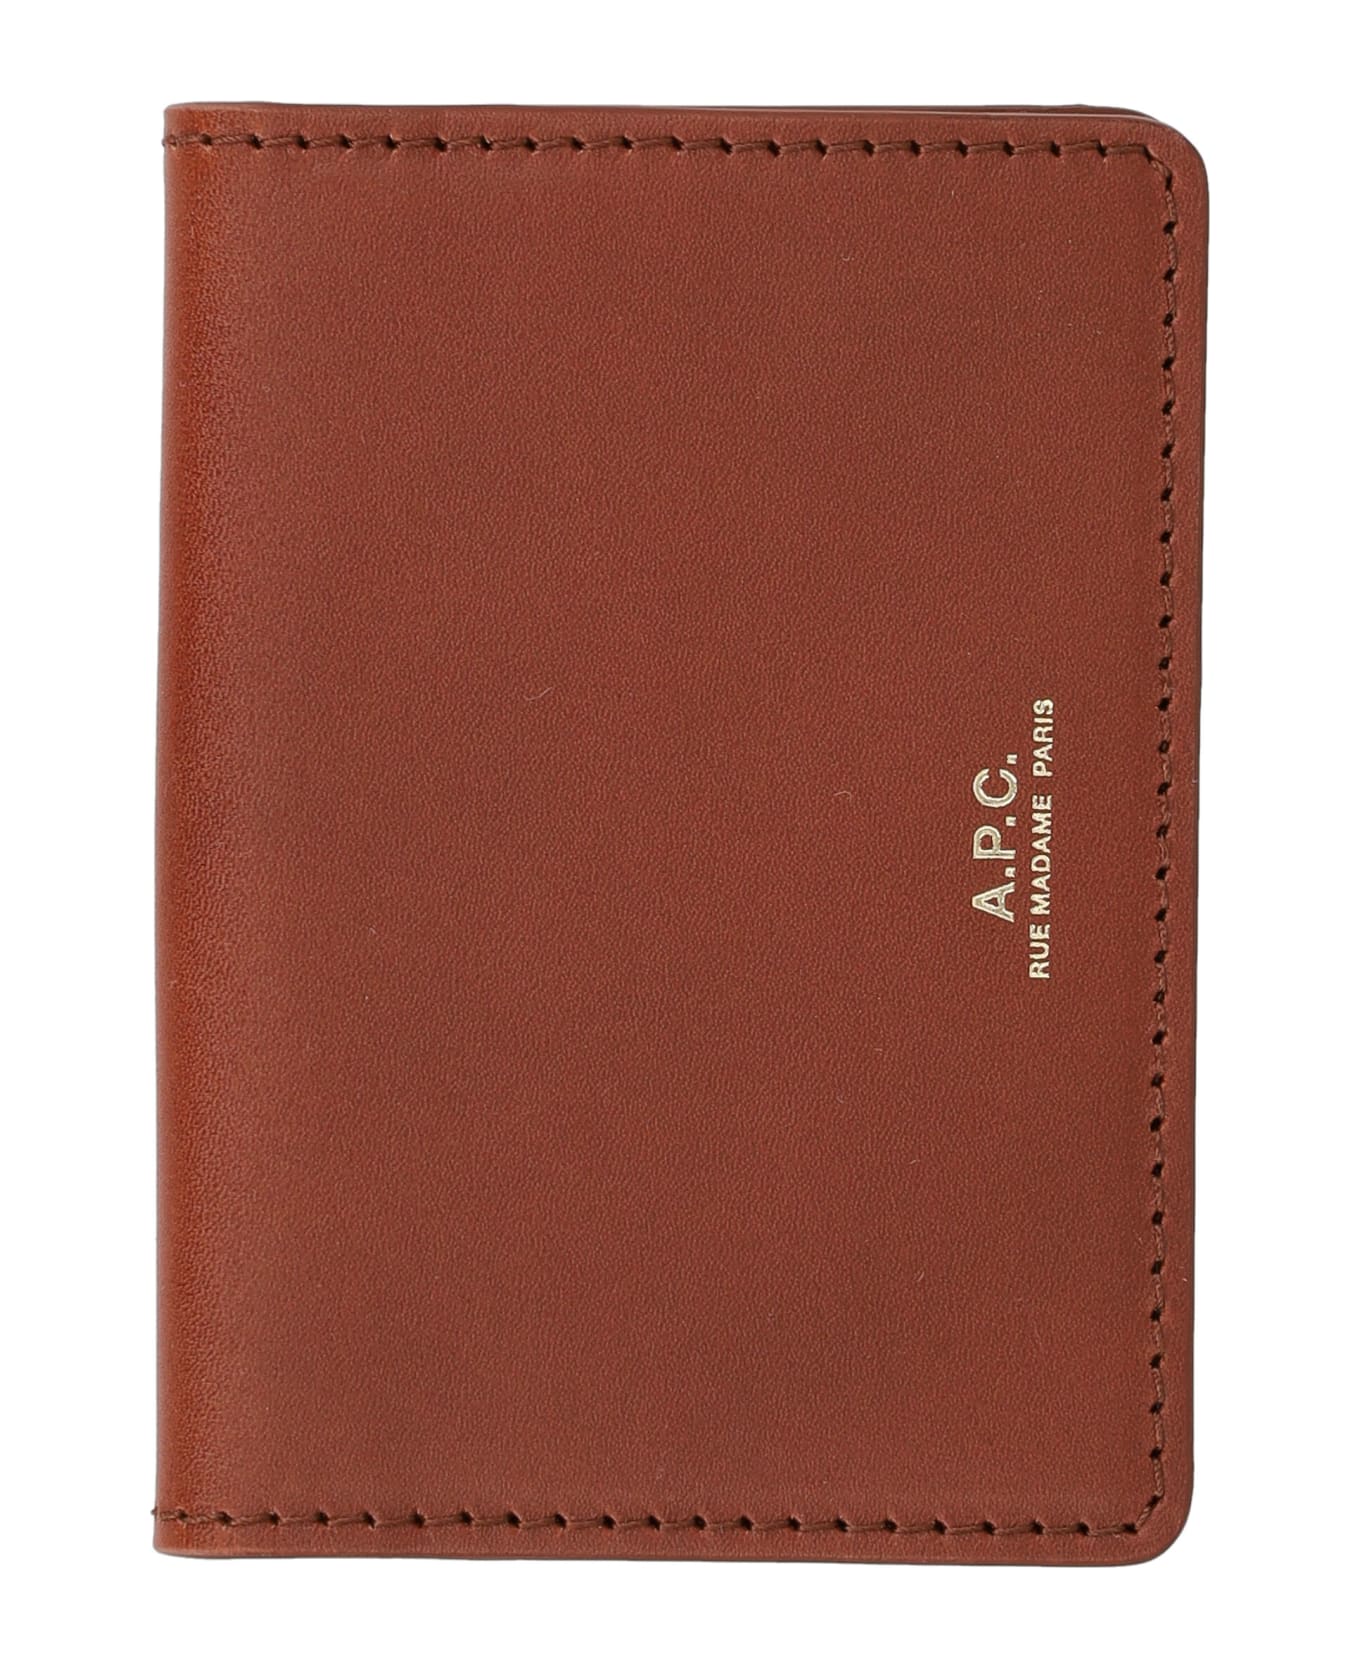 A.P.C. Bi-fold Wallet With Laminated Logo In Leather - NOISETTE 財布